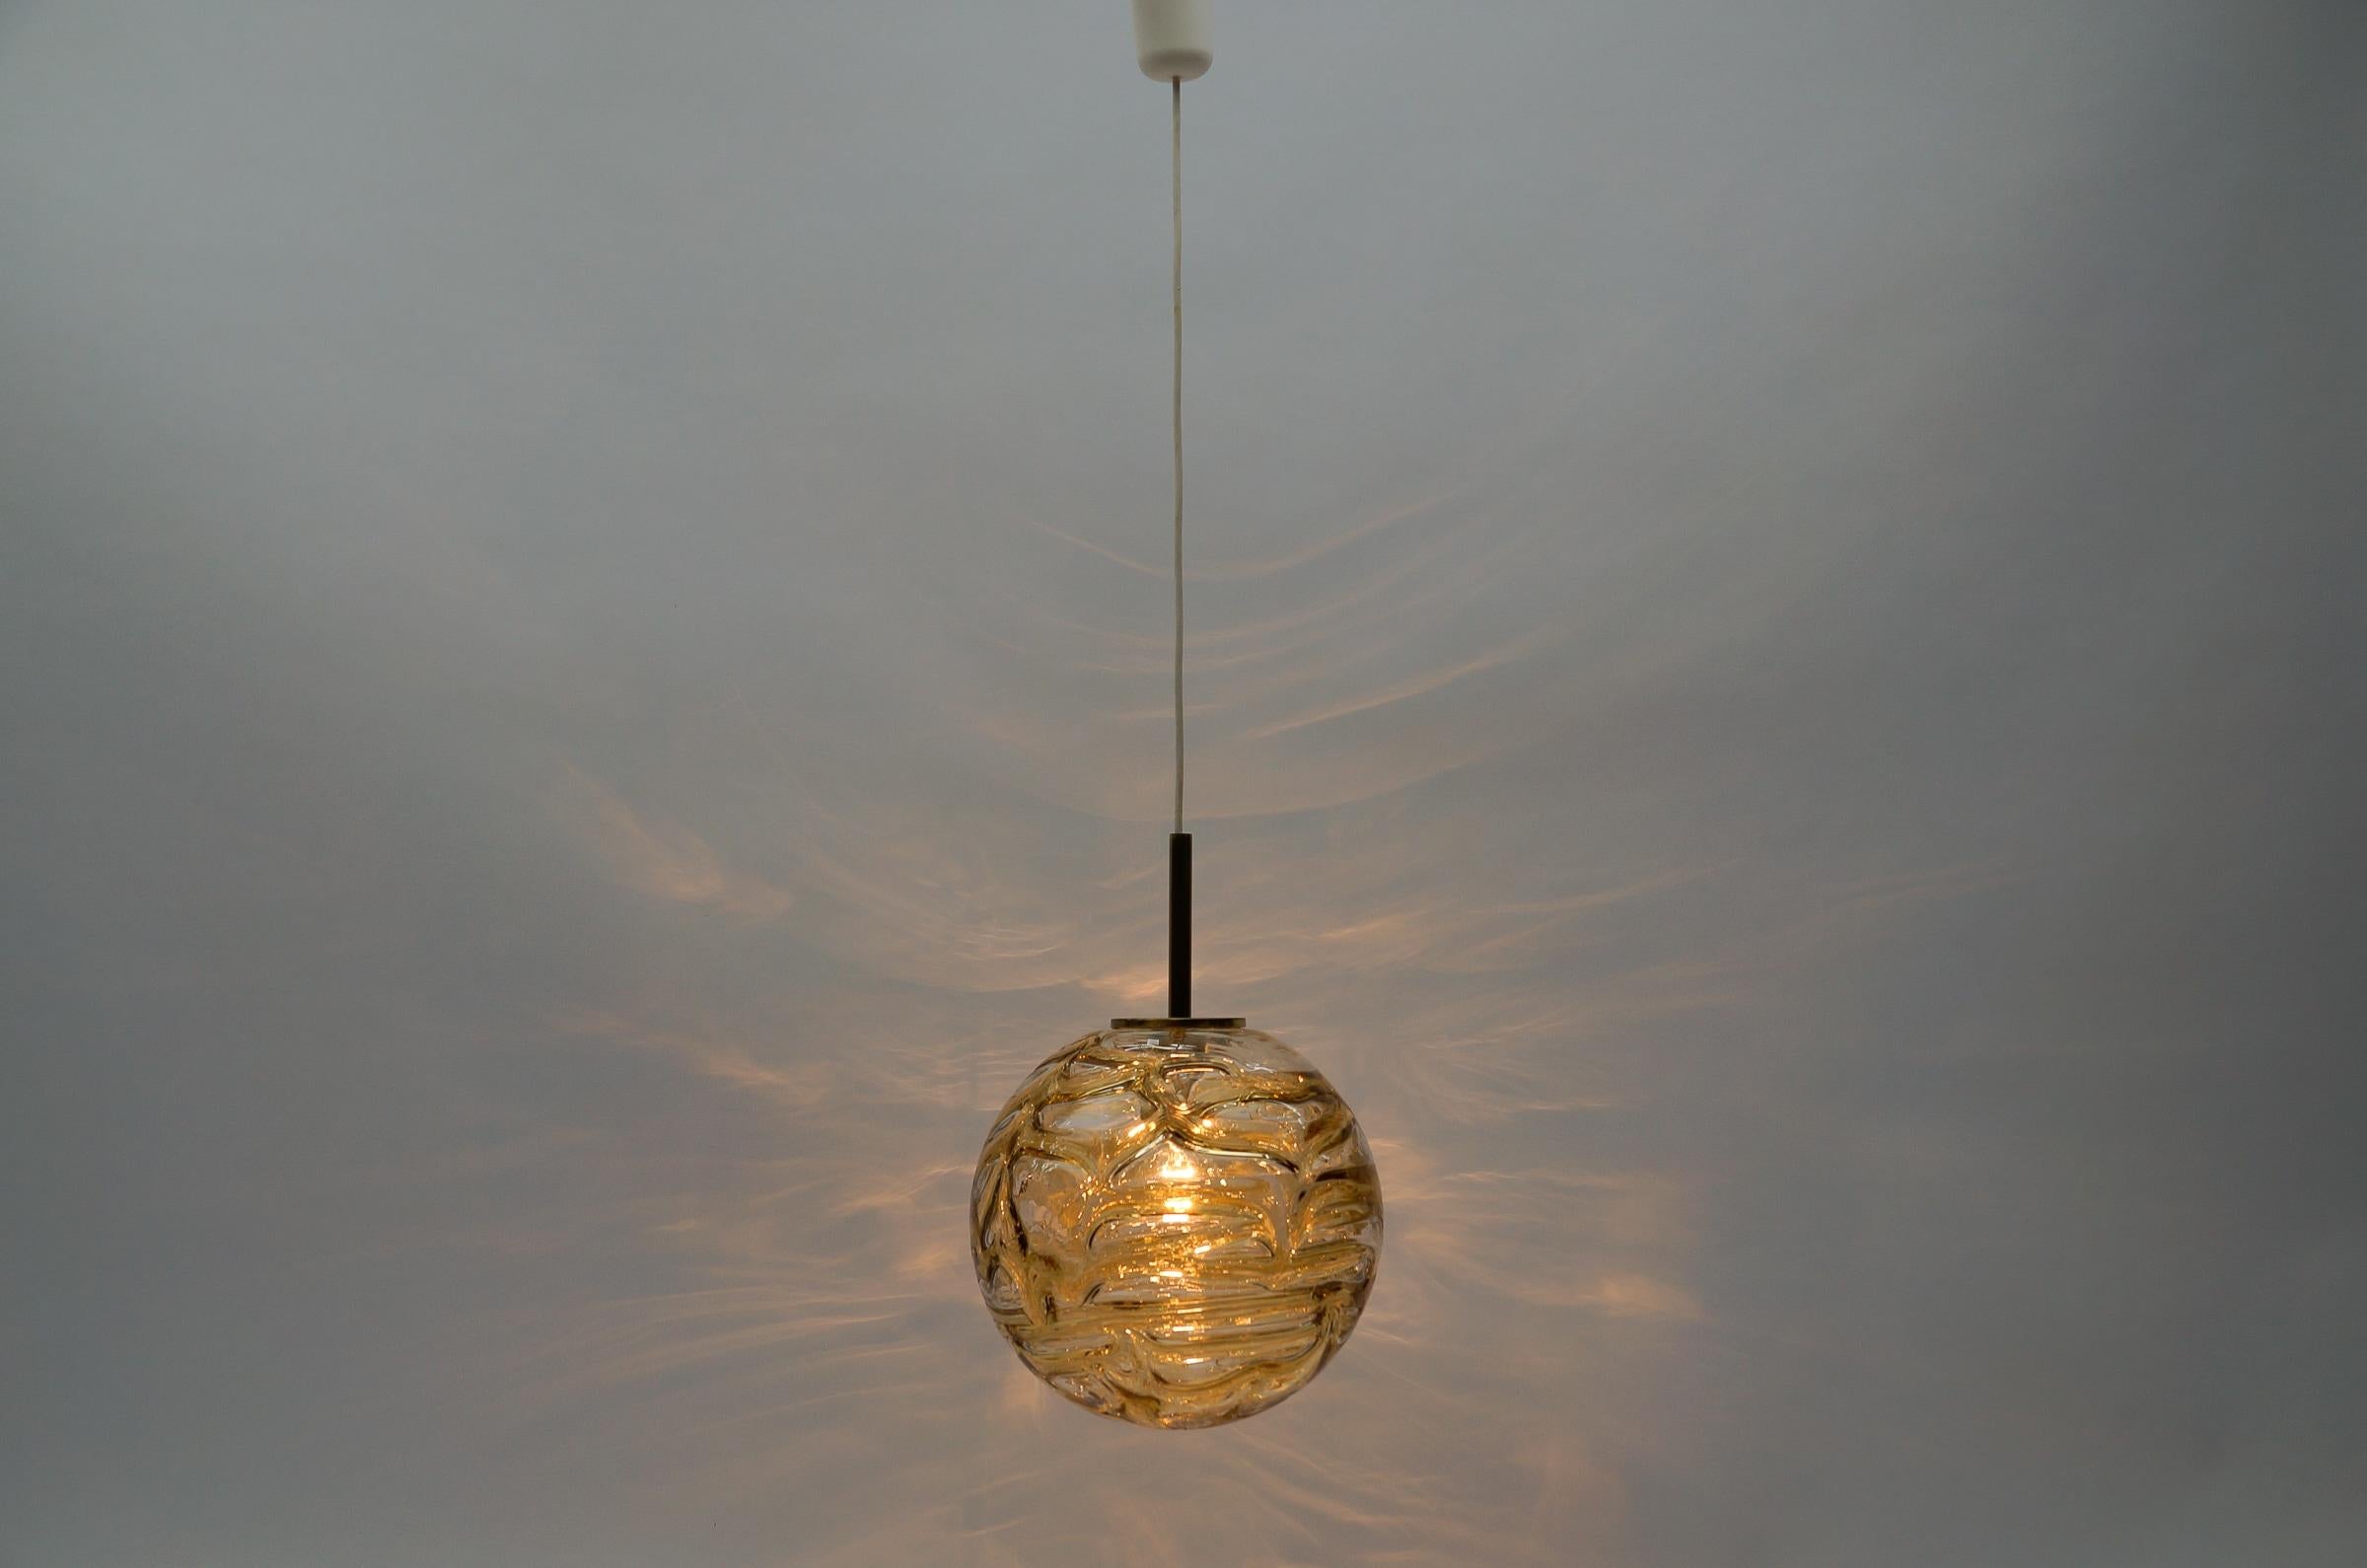 Mid-Century Modern Yellow Murano Glass Ball Pendant Lamp by Doria, - 1960s Germany For Sale